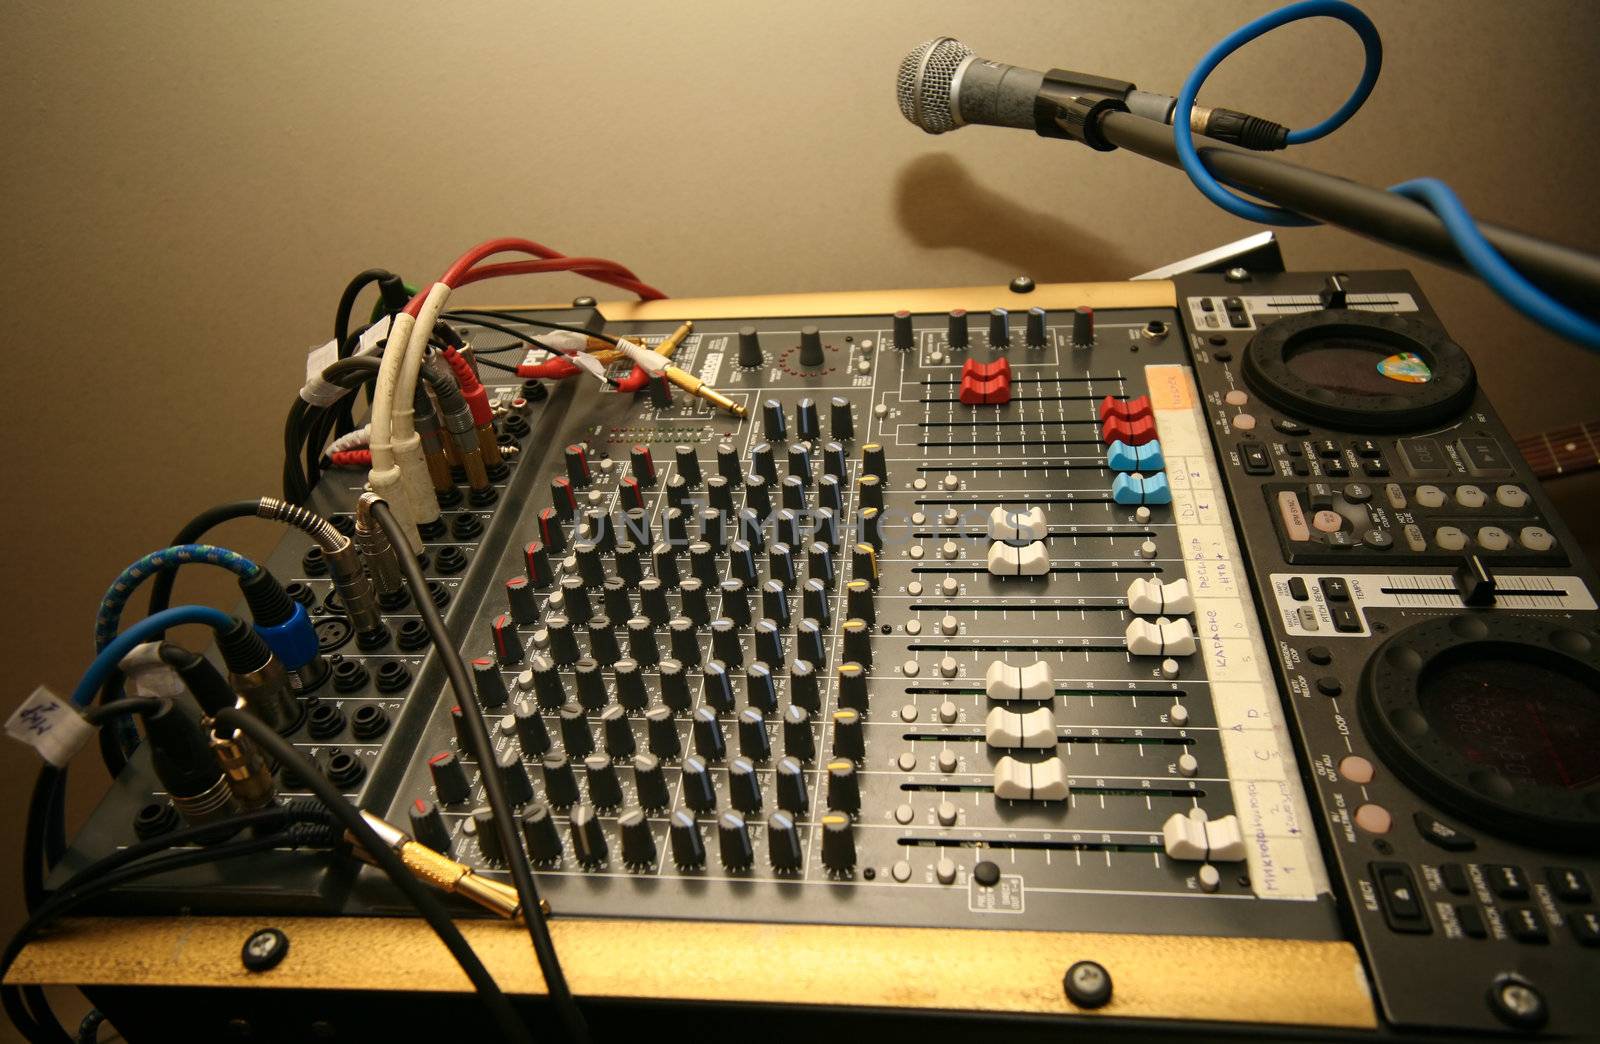 The musical board and microphone